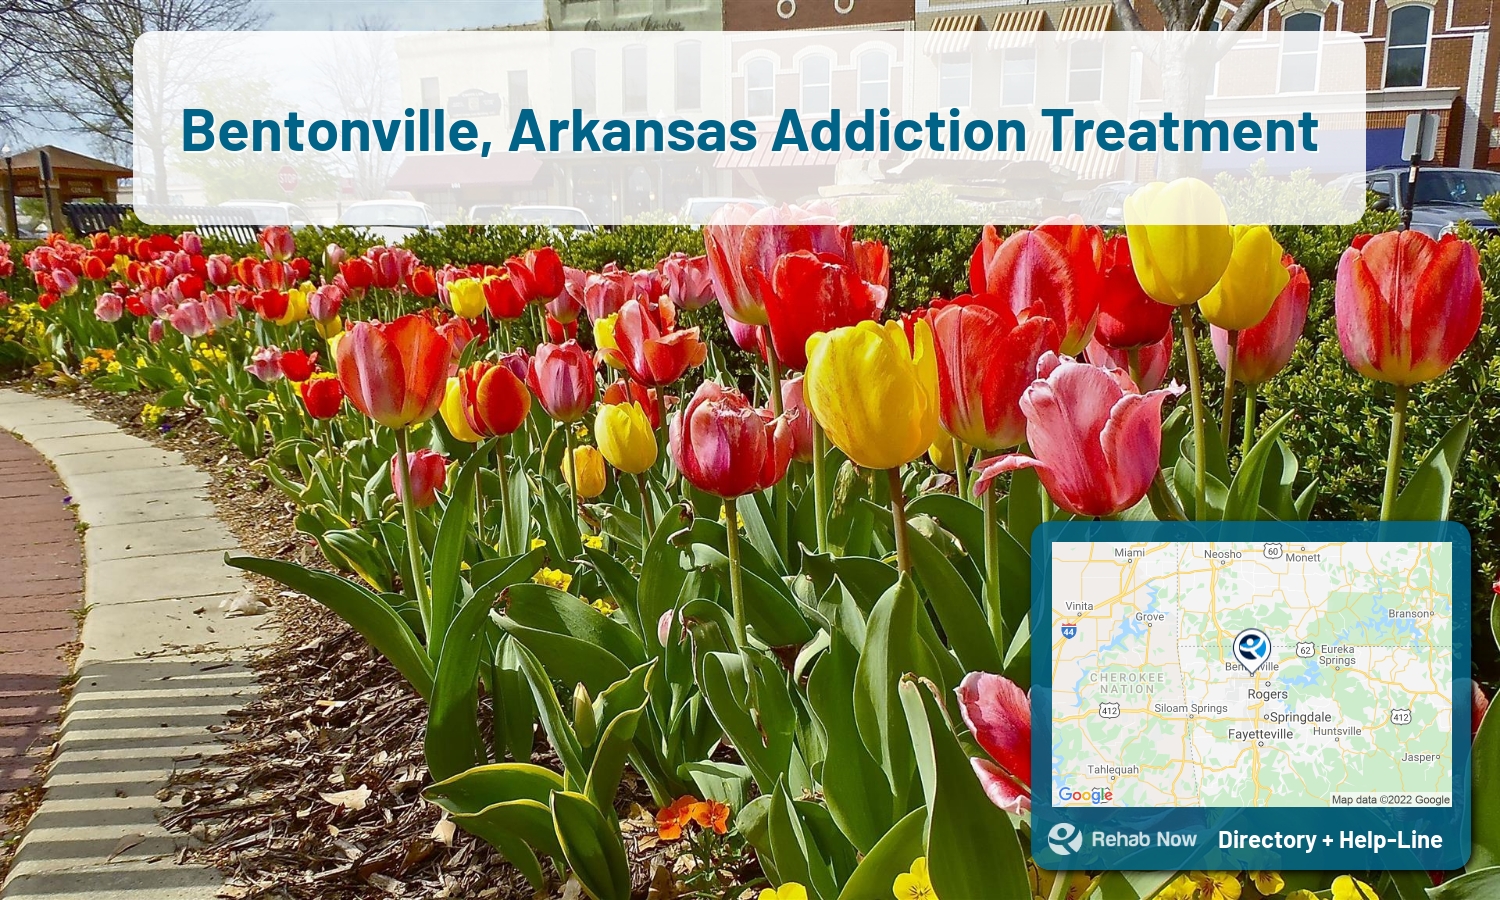 Drug rehab and alcohol treatment services nearby Bentonville, AR. Need help choosing a treatment program? Call our free hotline!